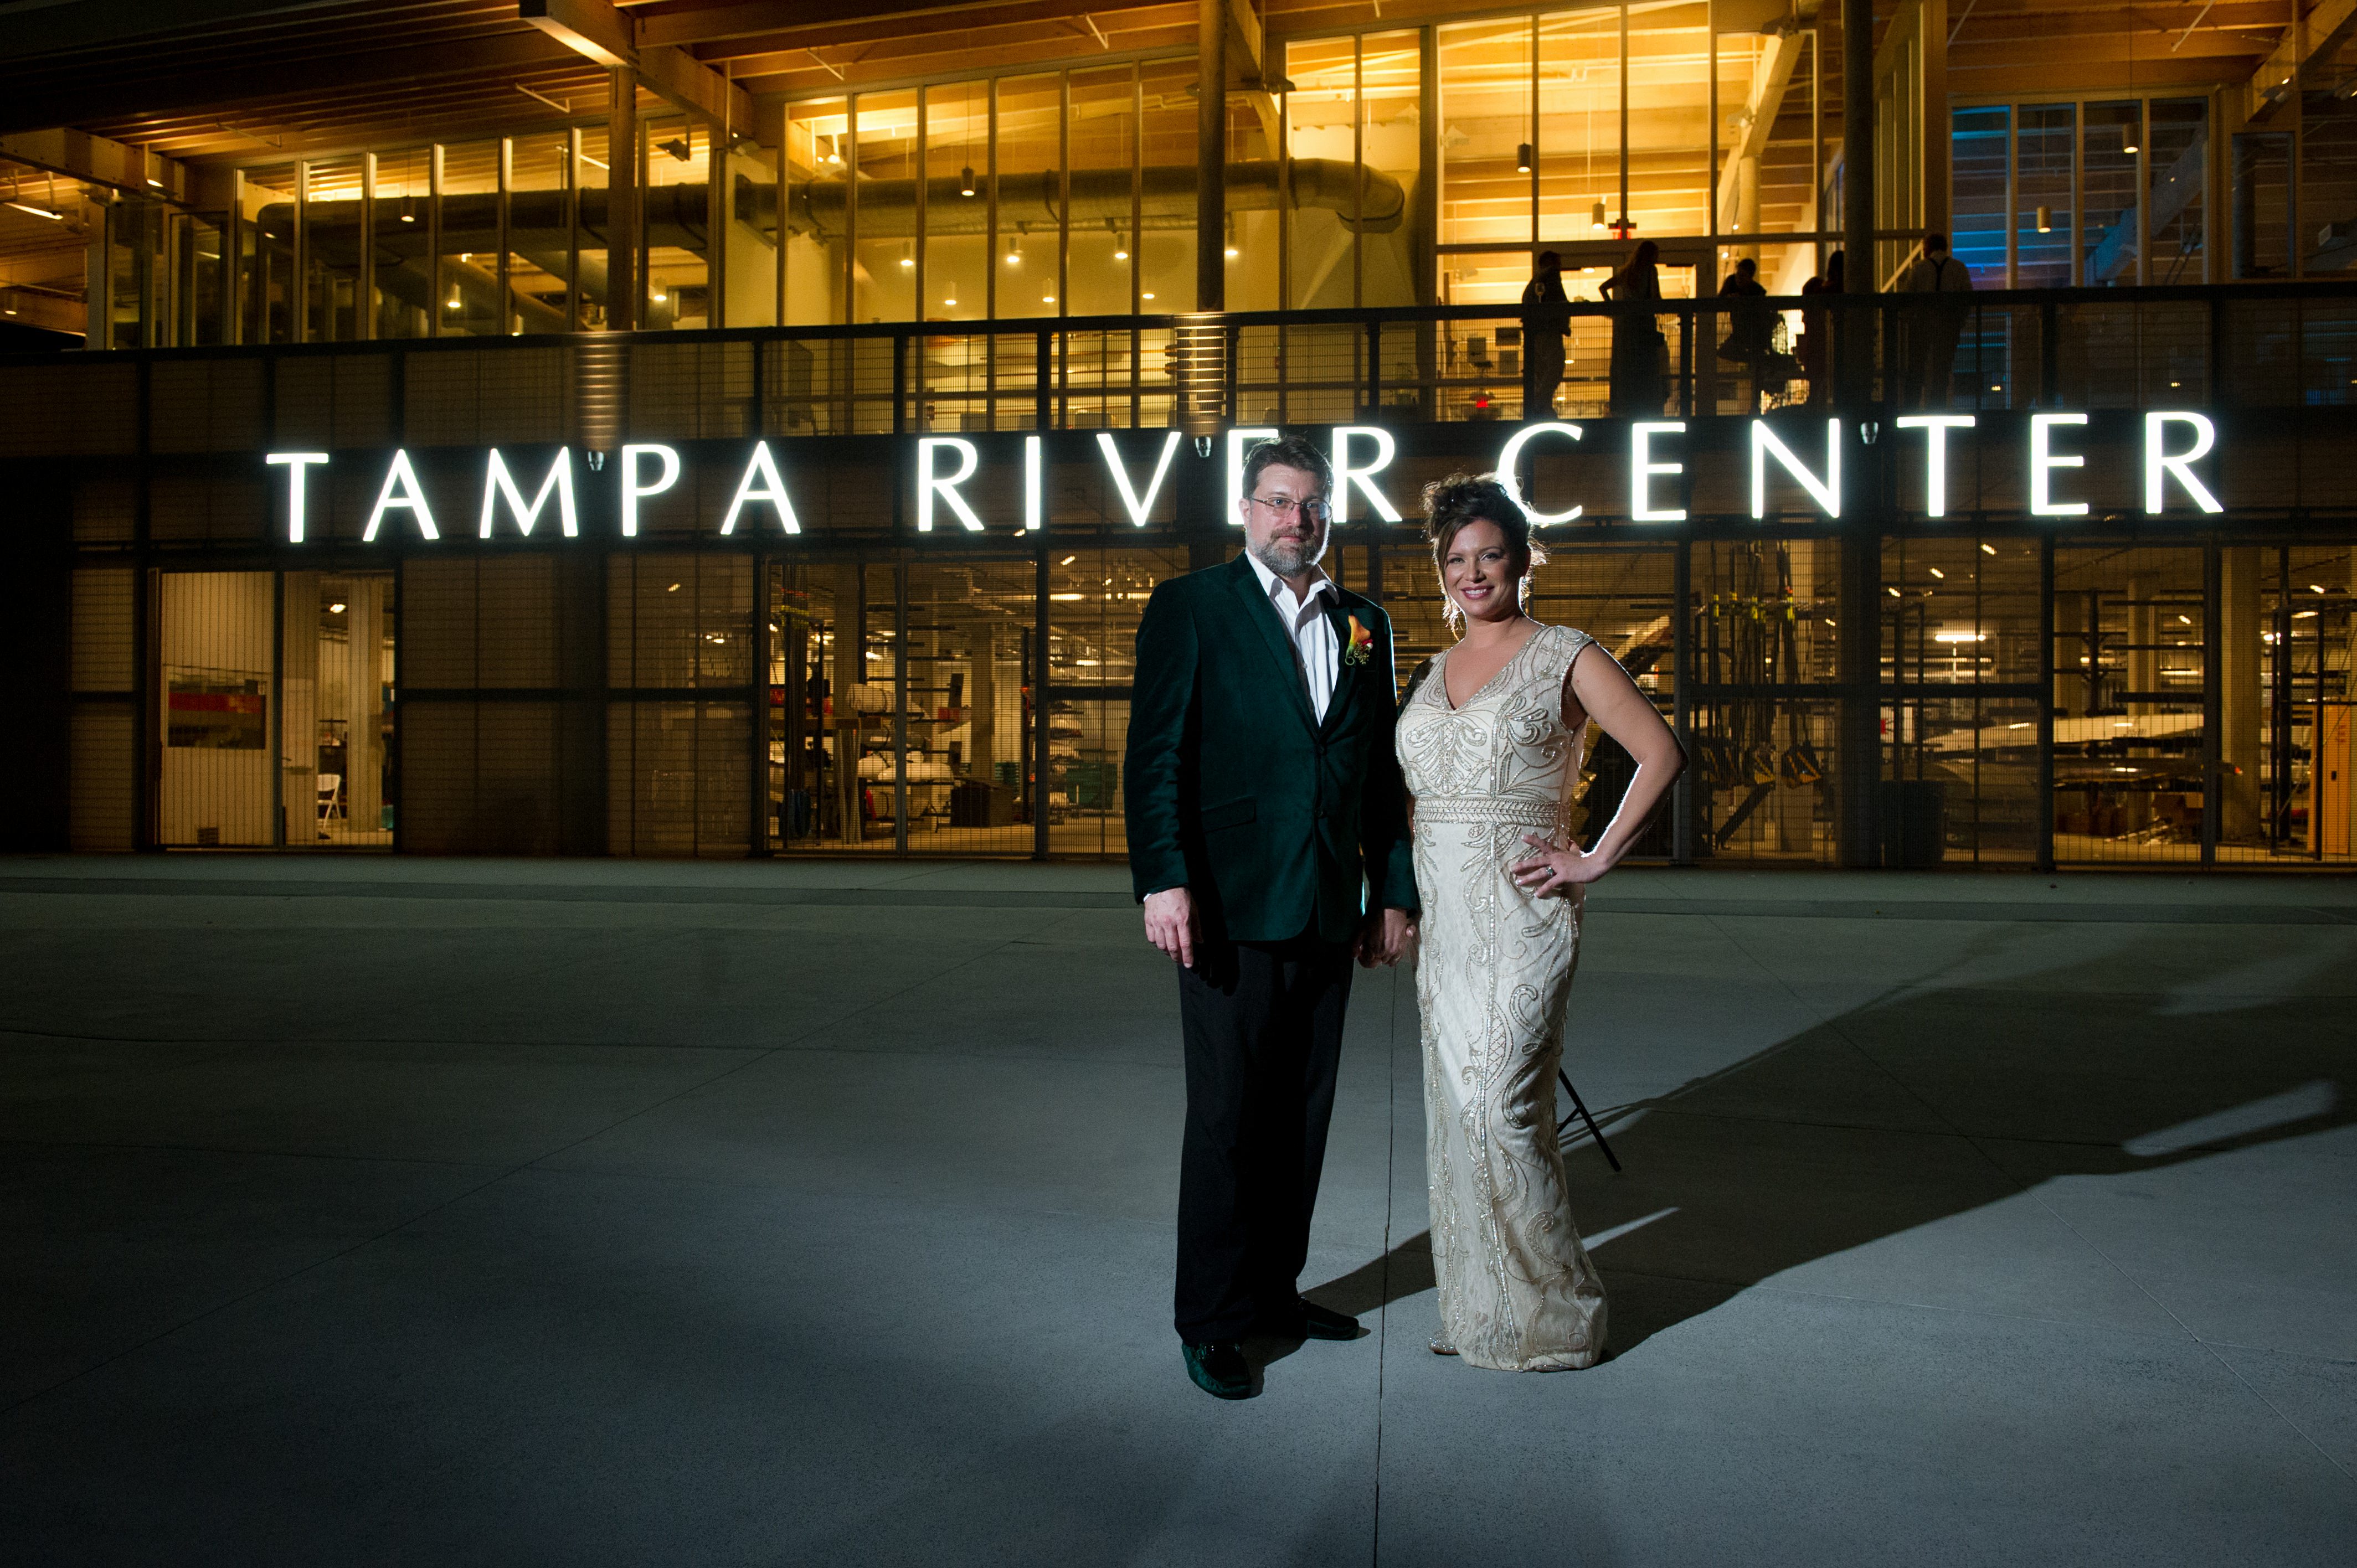 Tampa Bay Bride and Groom in Nighttime Wedding Portrait In Front of Exterior of Tampa River Center in Downtown Tampa at Night, Bride in Ivory Wedding Dress with Gold Detailing, Groom in Emerald Green Velvet Jacket | Tampa Bay Wedding Photographer Andi Diamond Photography| Tampa Bay Wedding Makeup Artist Michelle Renee the Studio